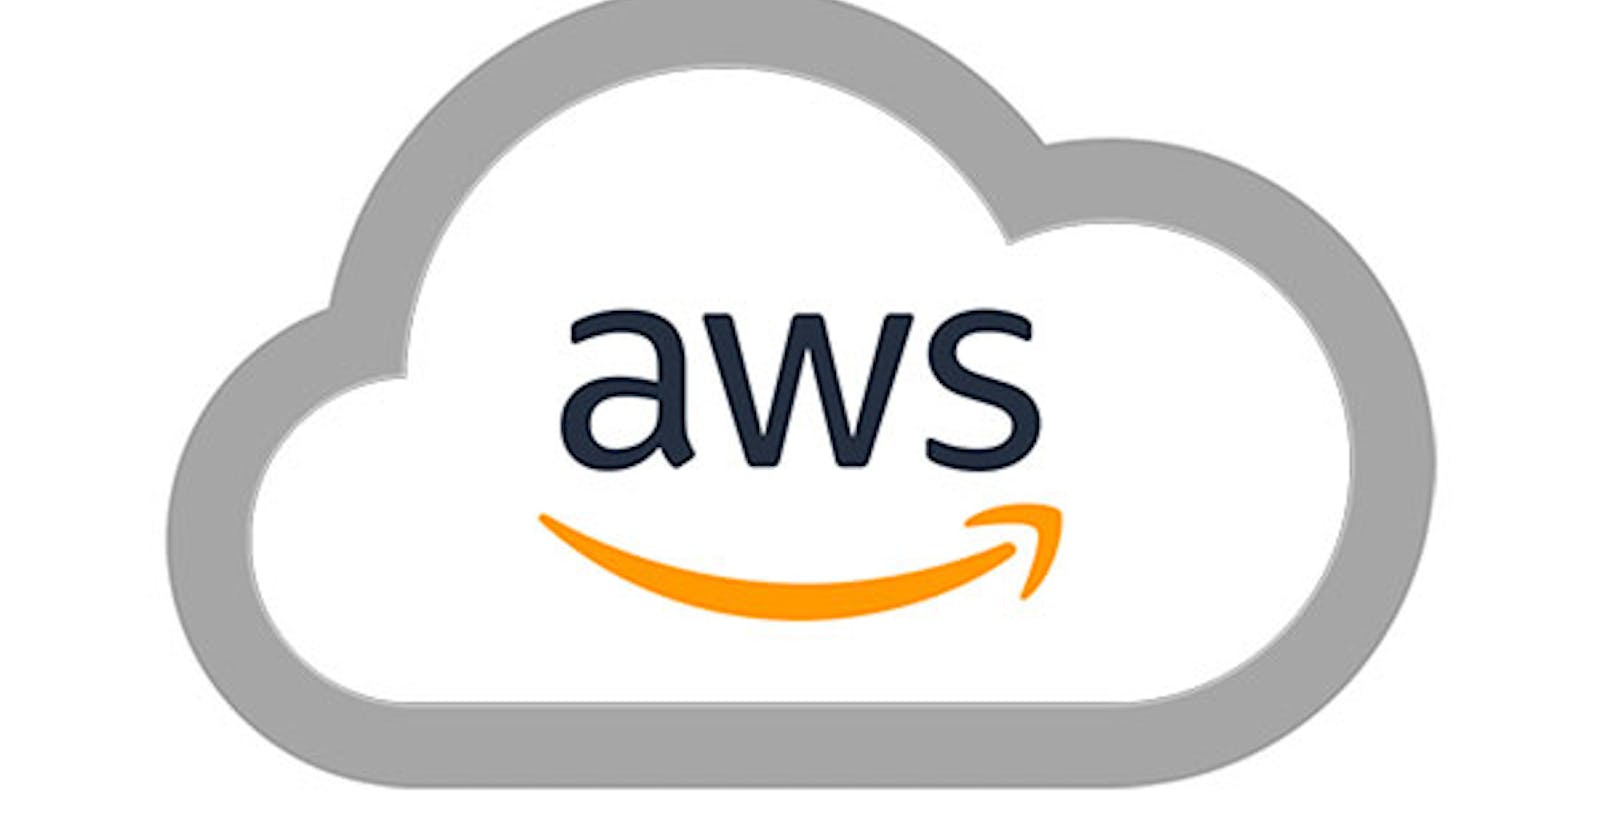 Getting started with AWS(Amazon Web Services)